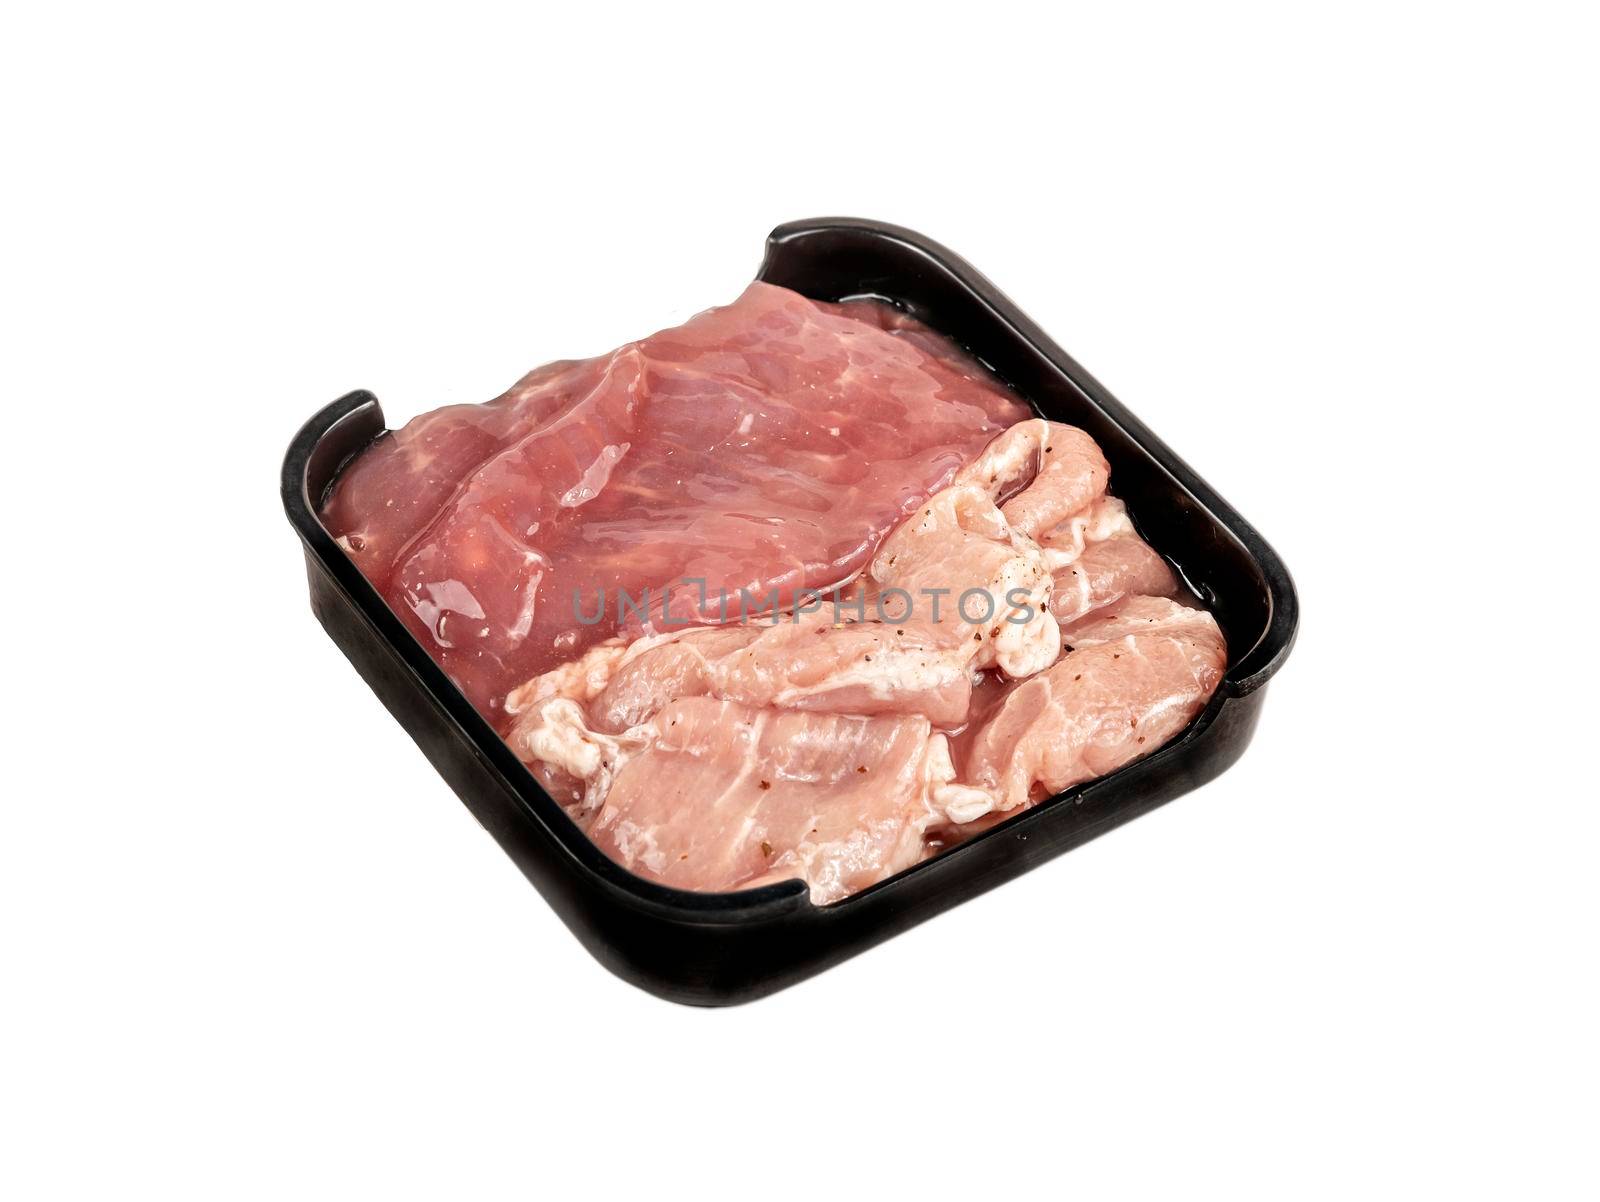 raw pork on plate over white background